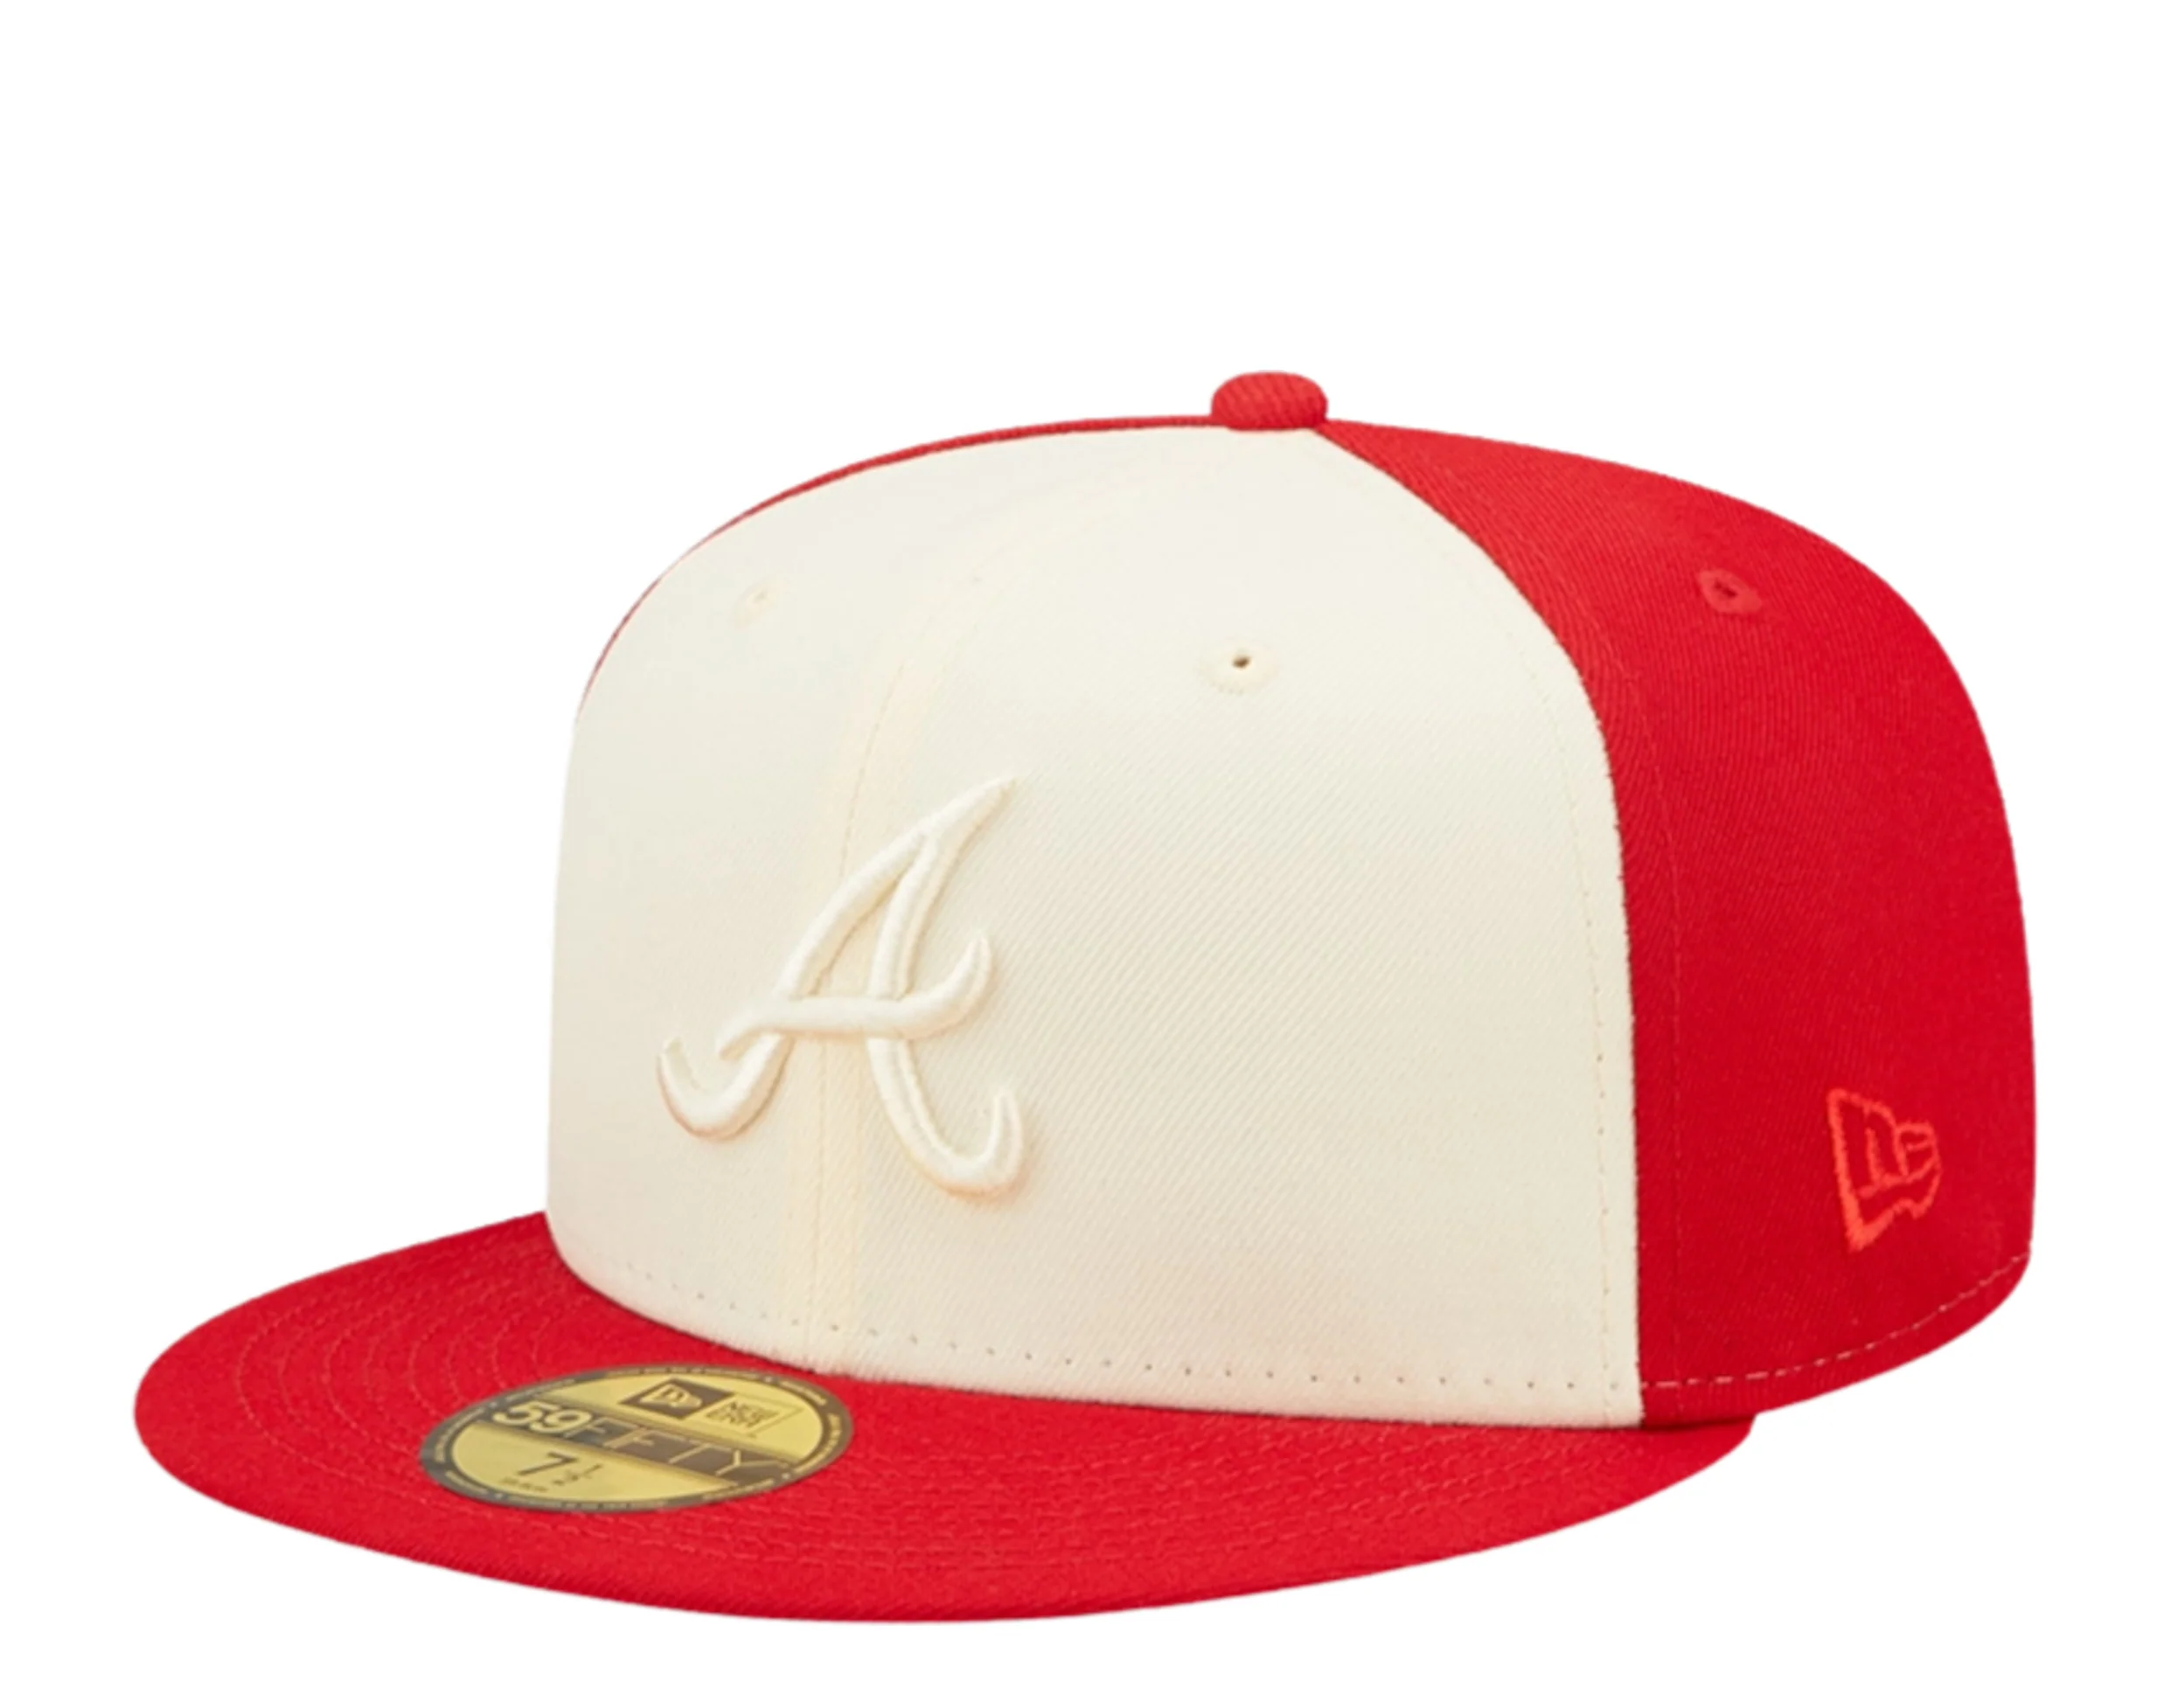 NEW ERA ATLANTA BRAVES 2-TONE 59FIFTY FITTED HAT-RED/CREAM